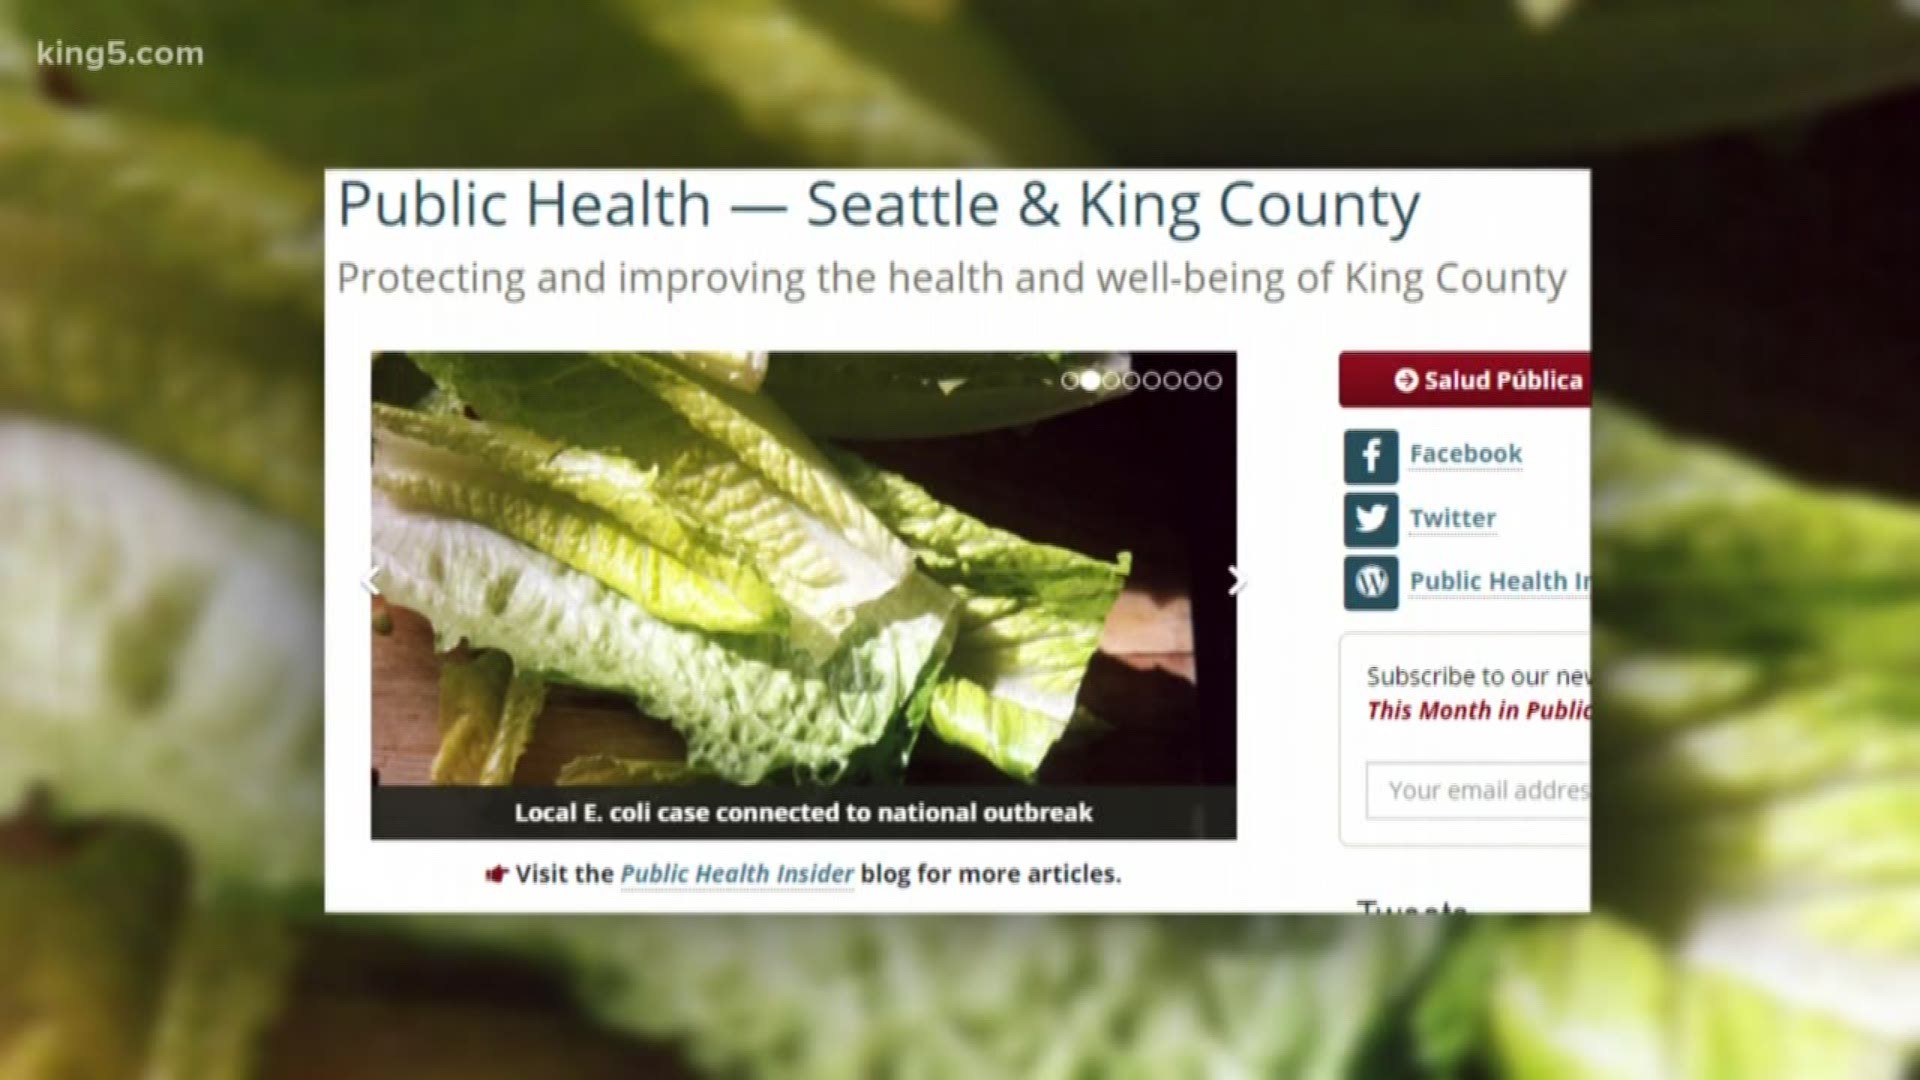 The health department told says the e-coli strain linked to seven people in King County is not connected to the national outbreak